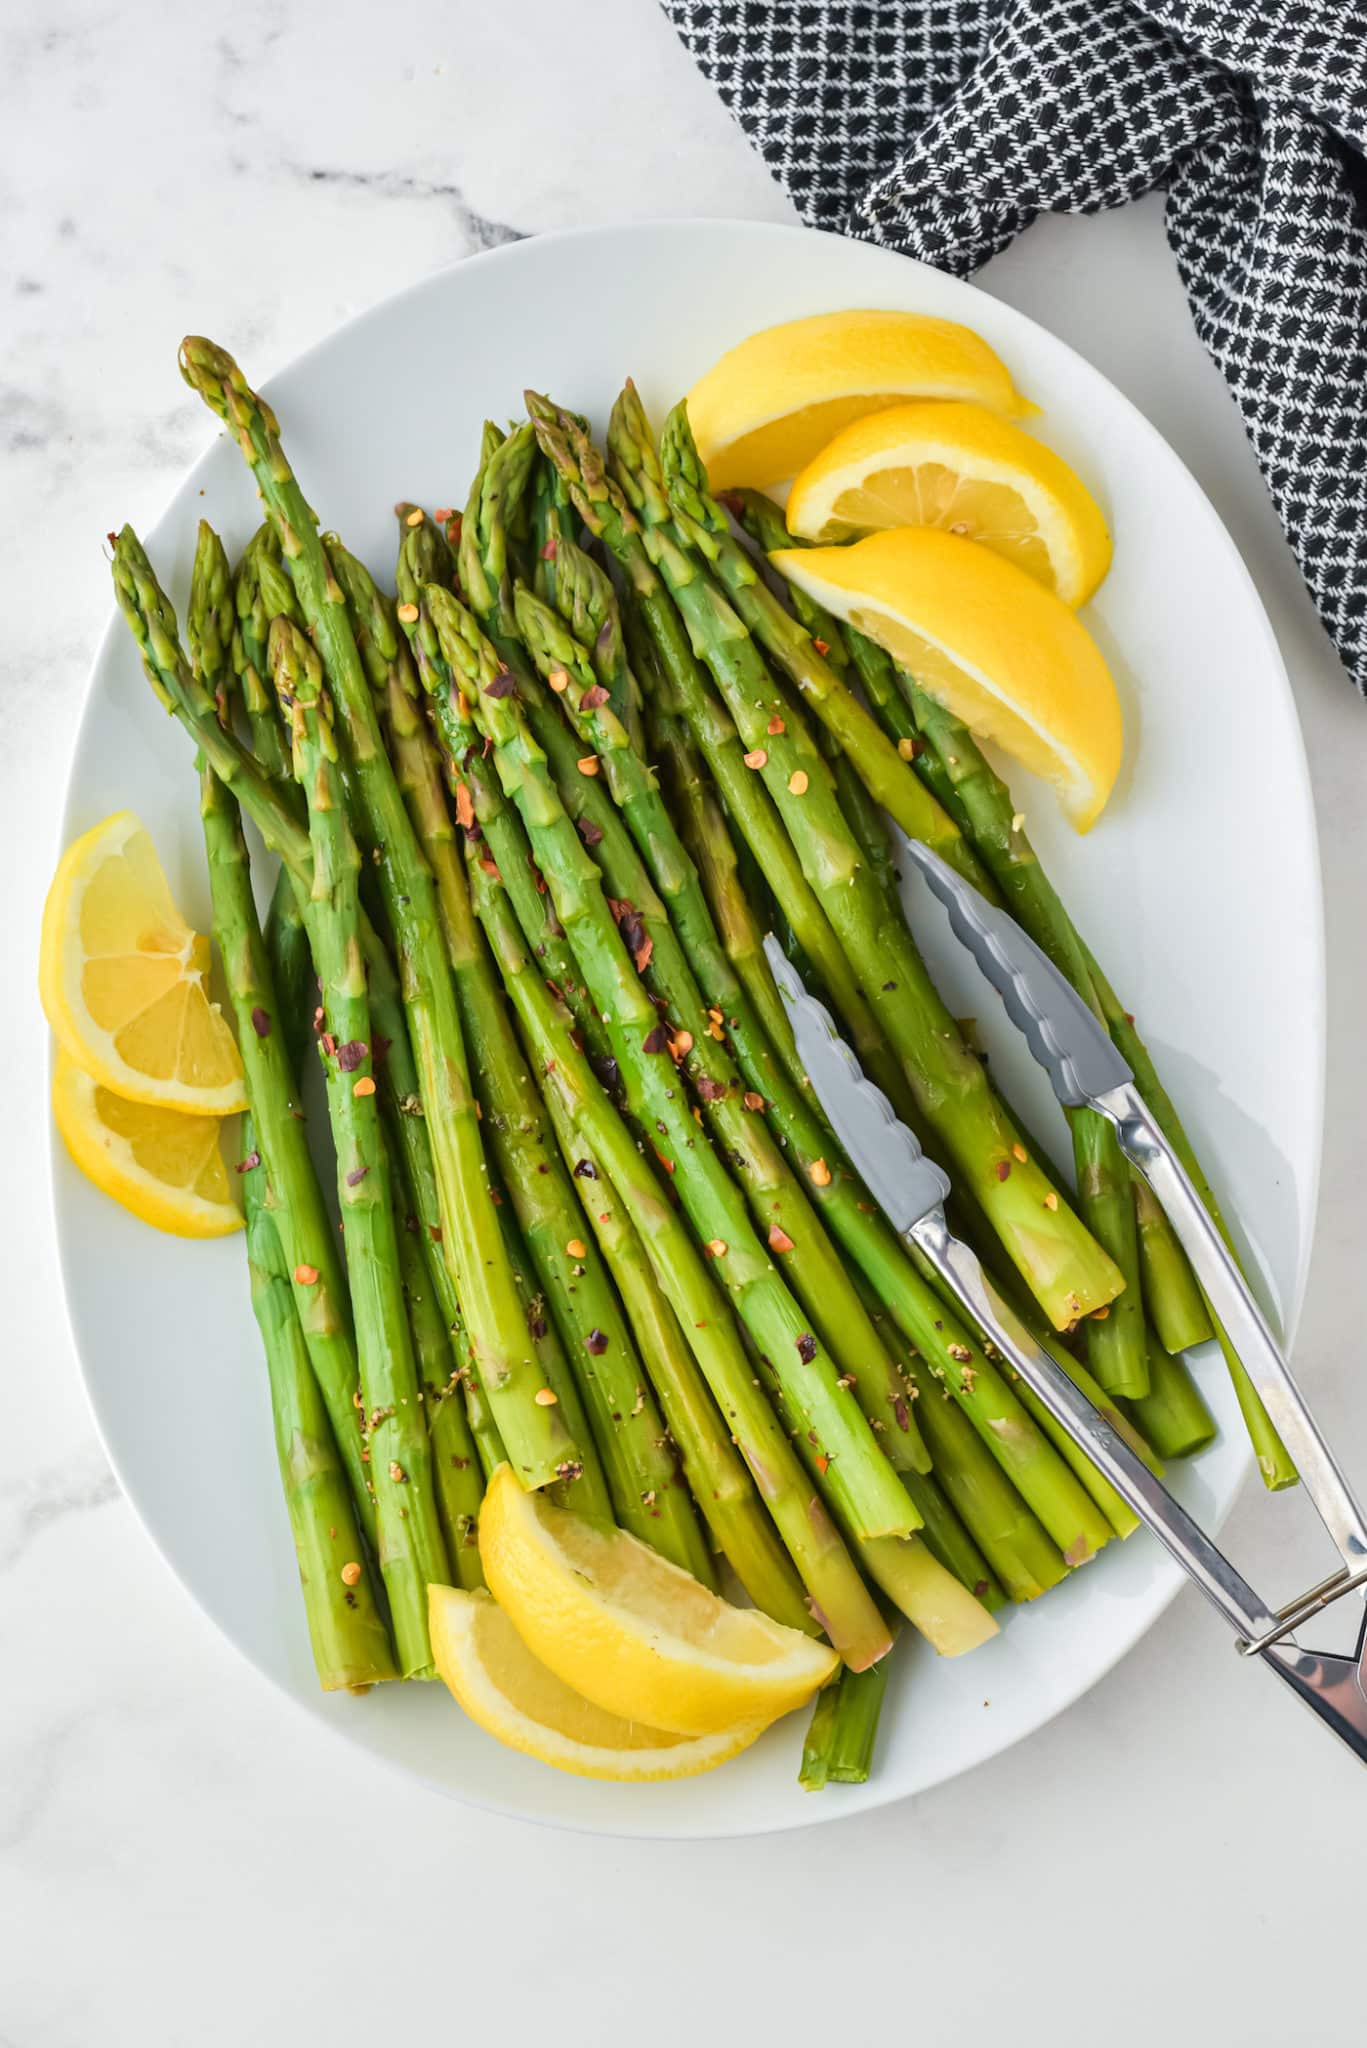 An oval white platter with cooked instant pot asparagus, lemon wedges, and tongs.